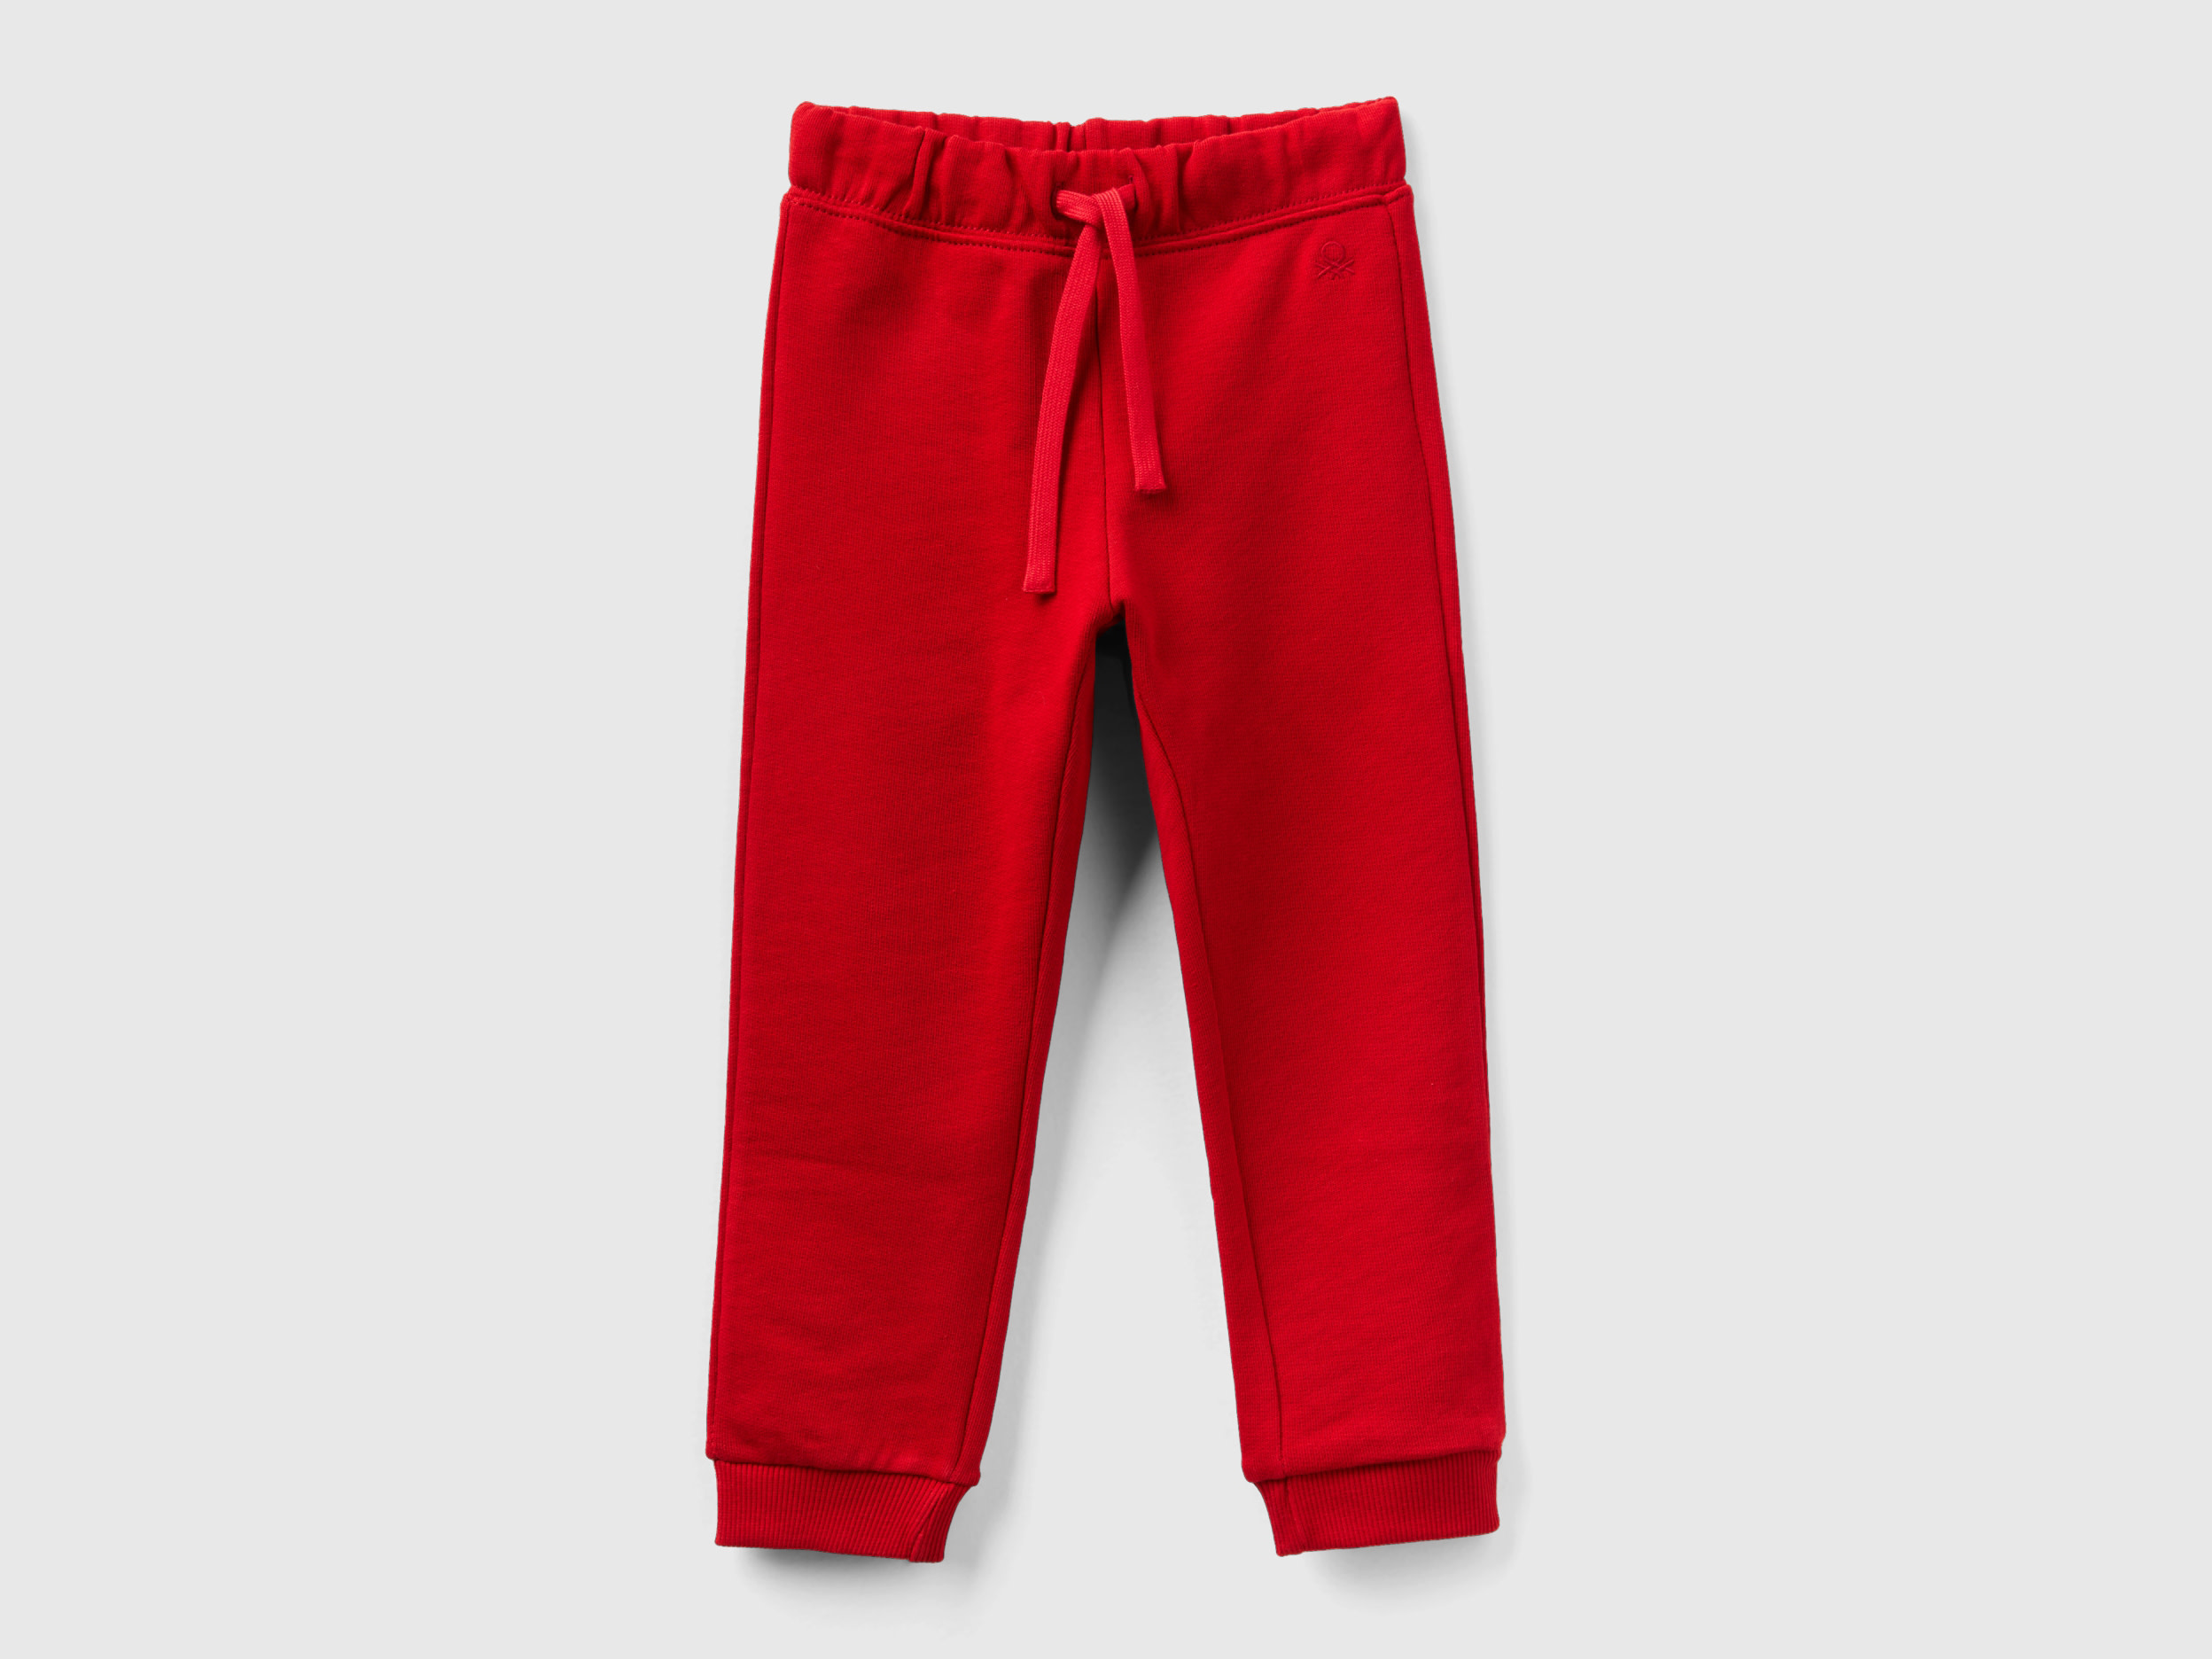 Benetton, Sweatpants In Organic Cotton, size 4-5, Red, Kids